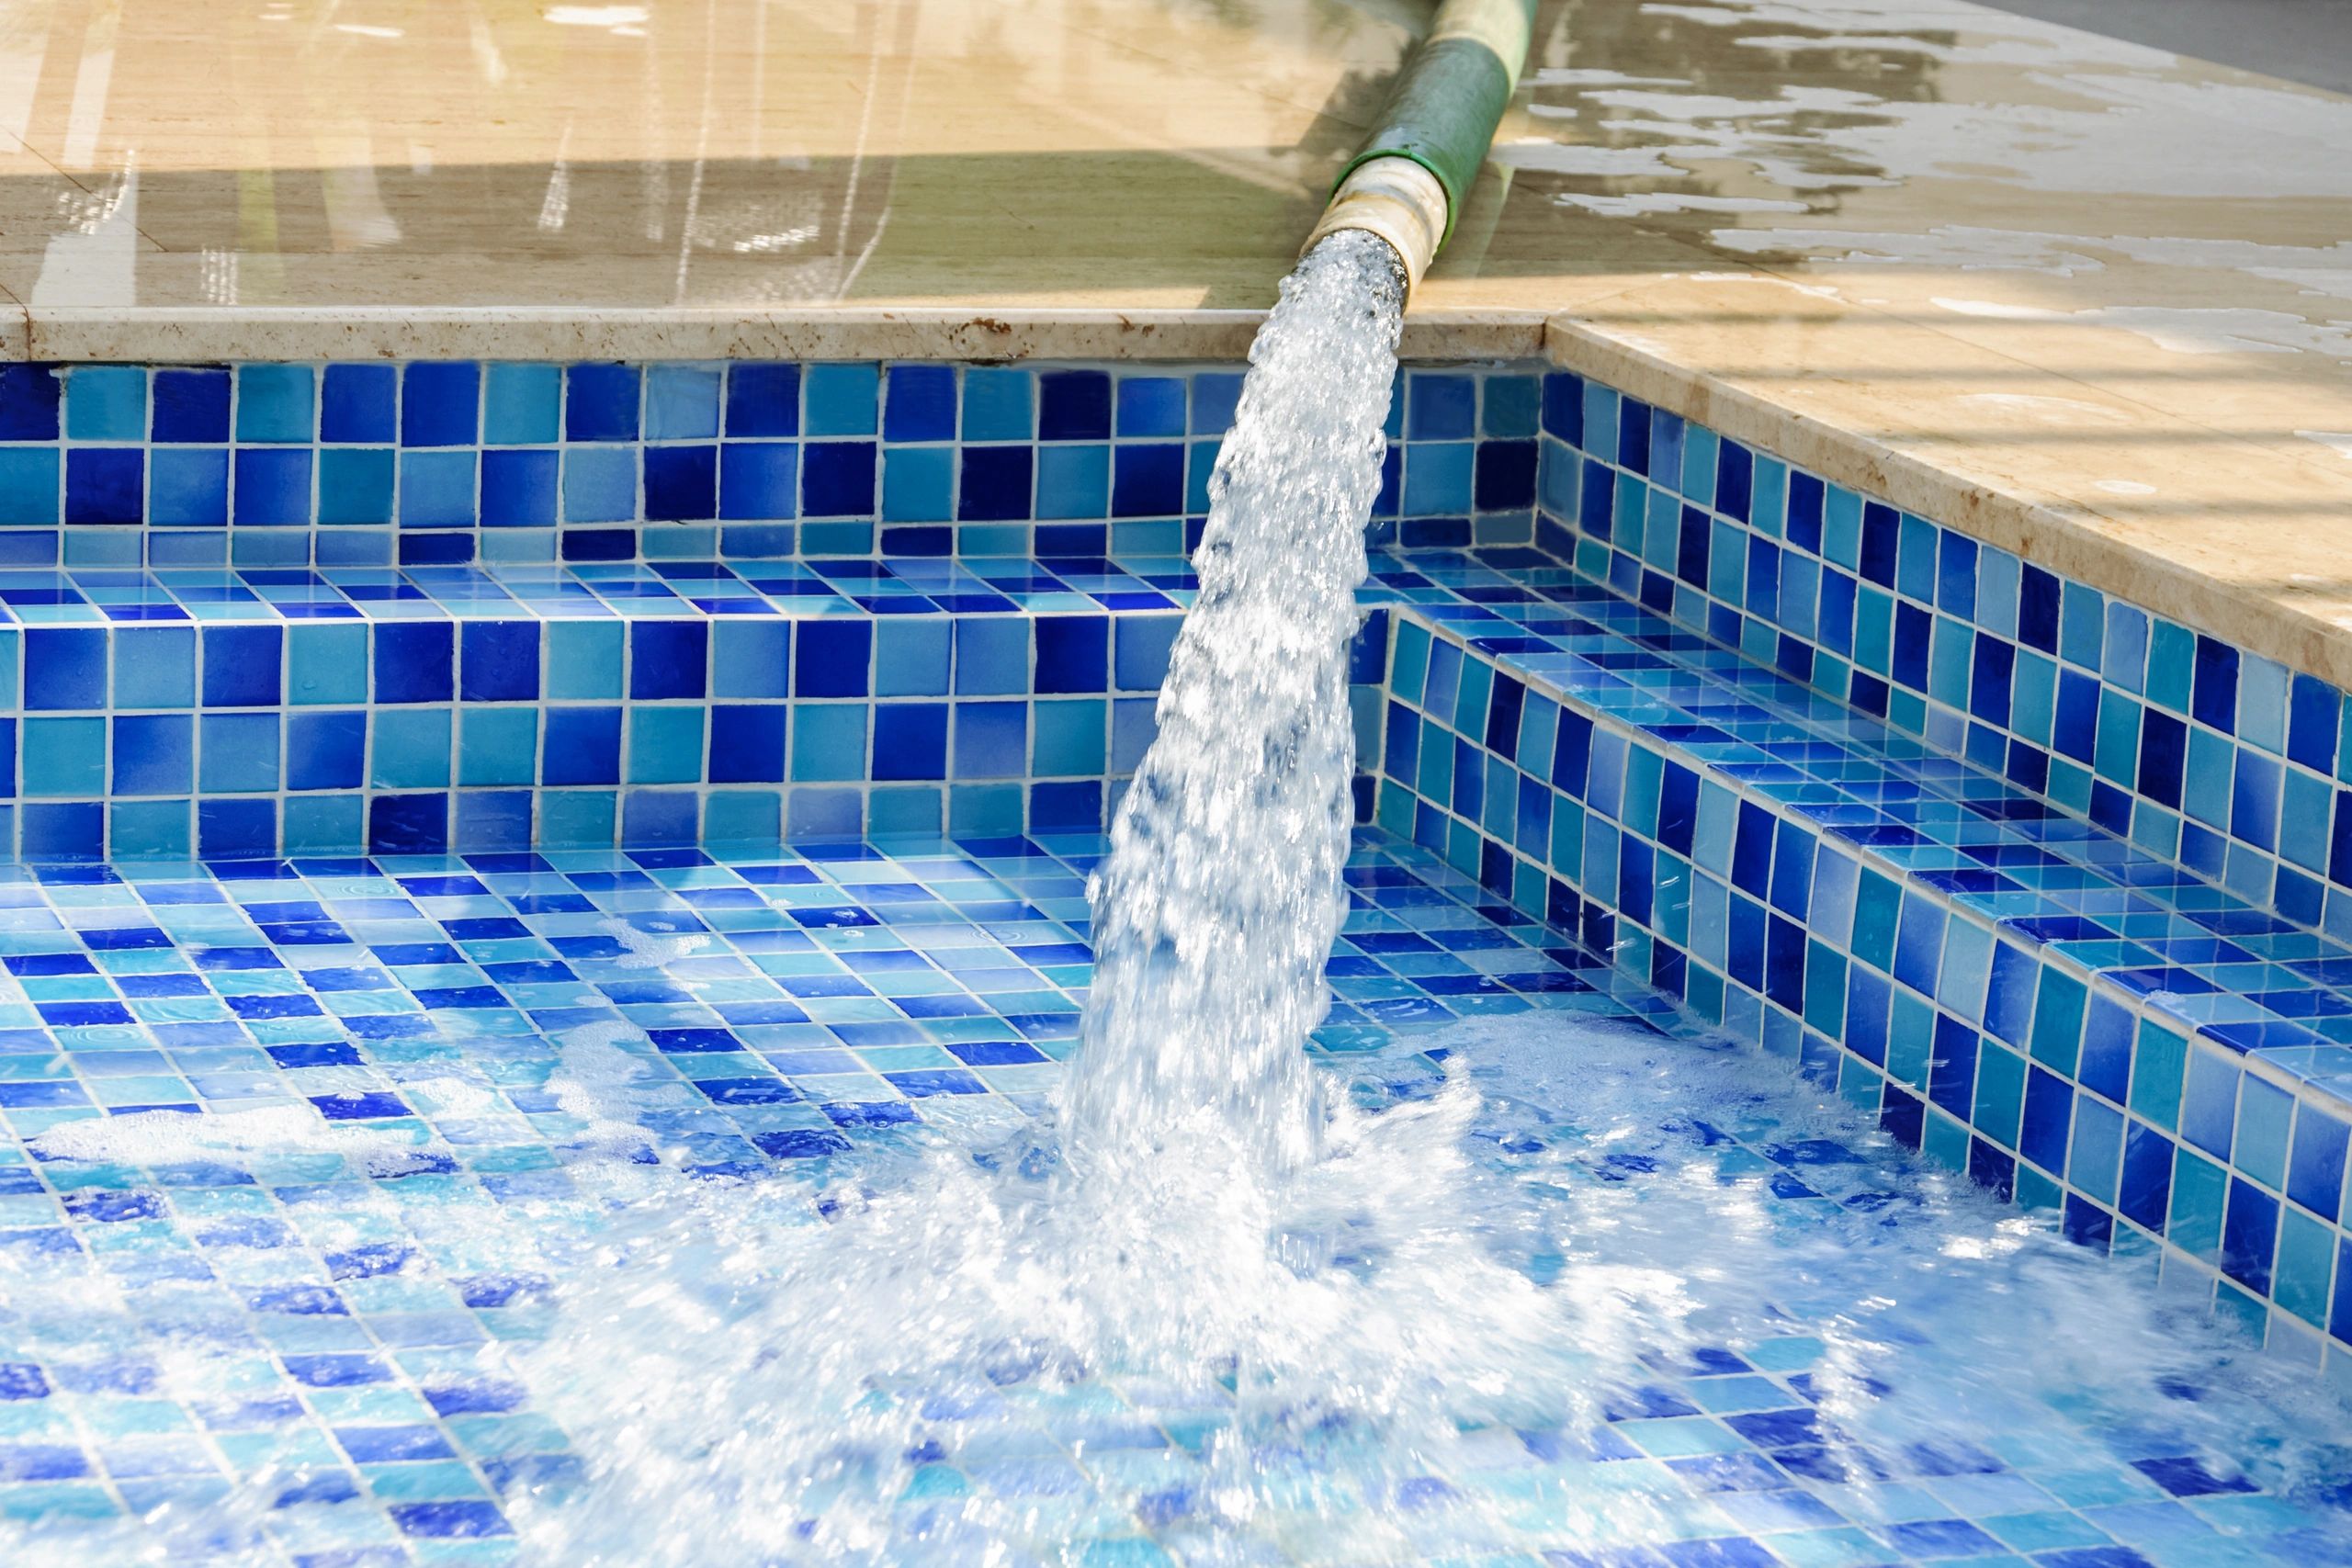 How many gallons is your pool losing per day? Evaporation vs. Water-Loss